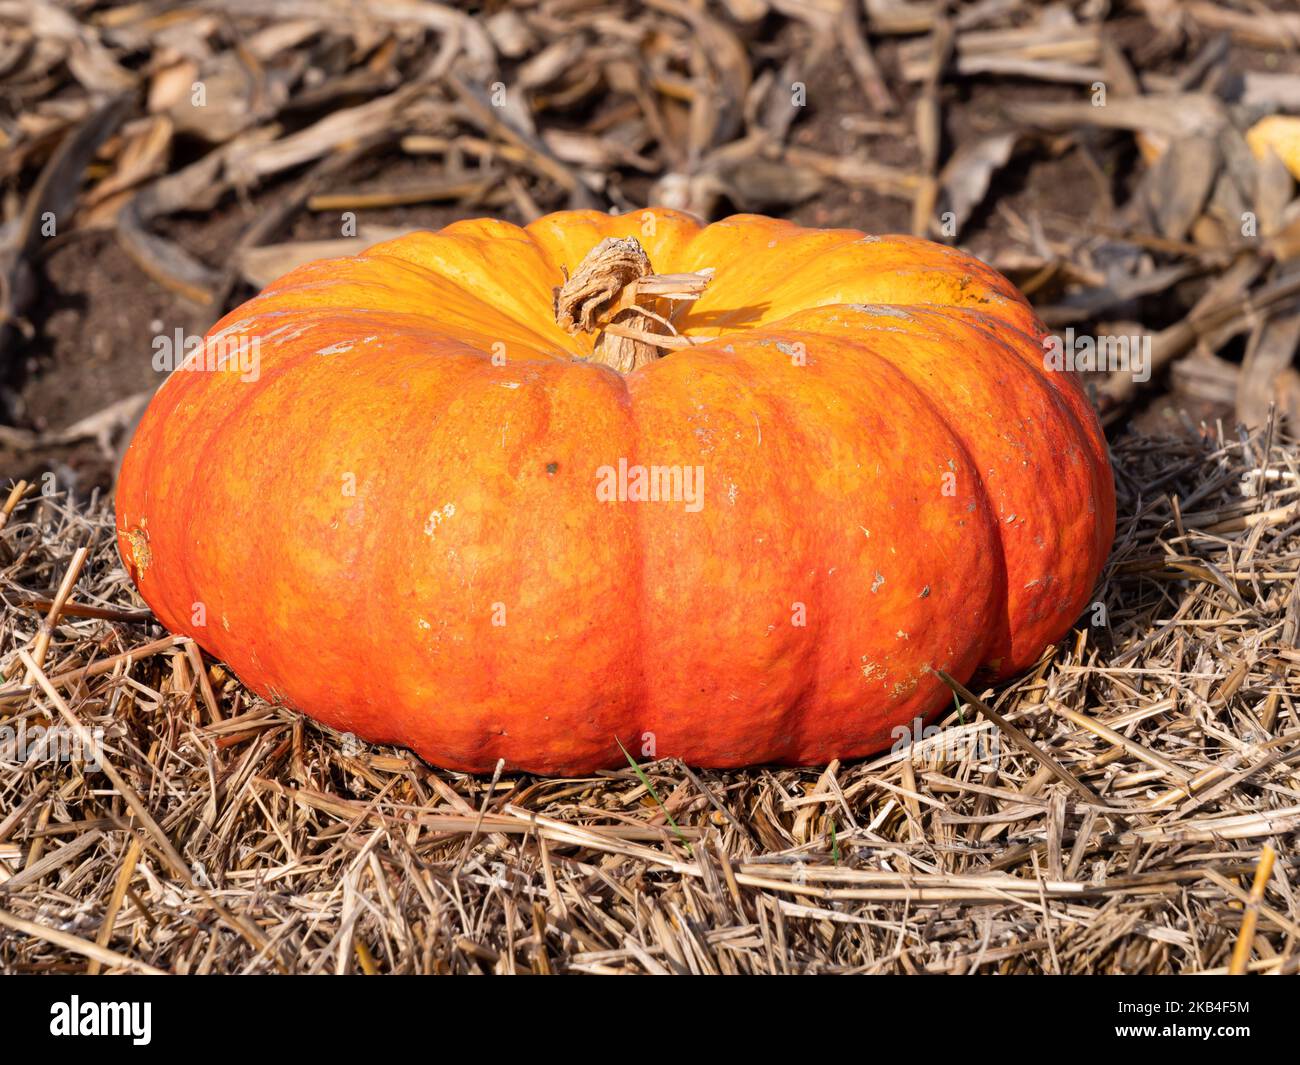 A pumpkin is a cultivar of winter squash that is round with smooth, slightly ribbed skin, and is most often deep yellow to orange in coloration. Stock Photo